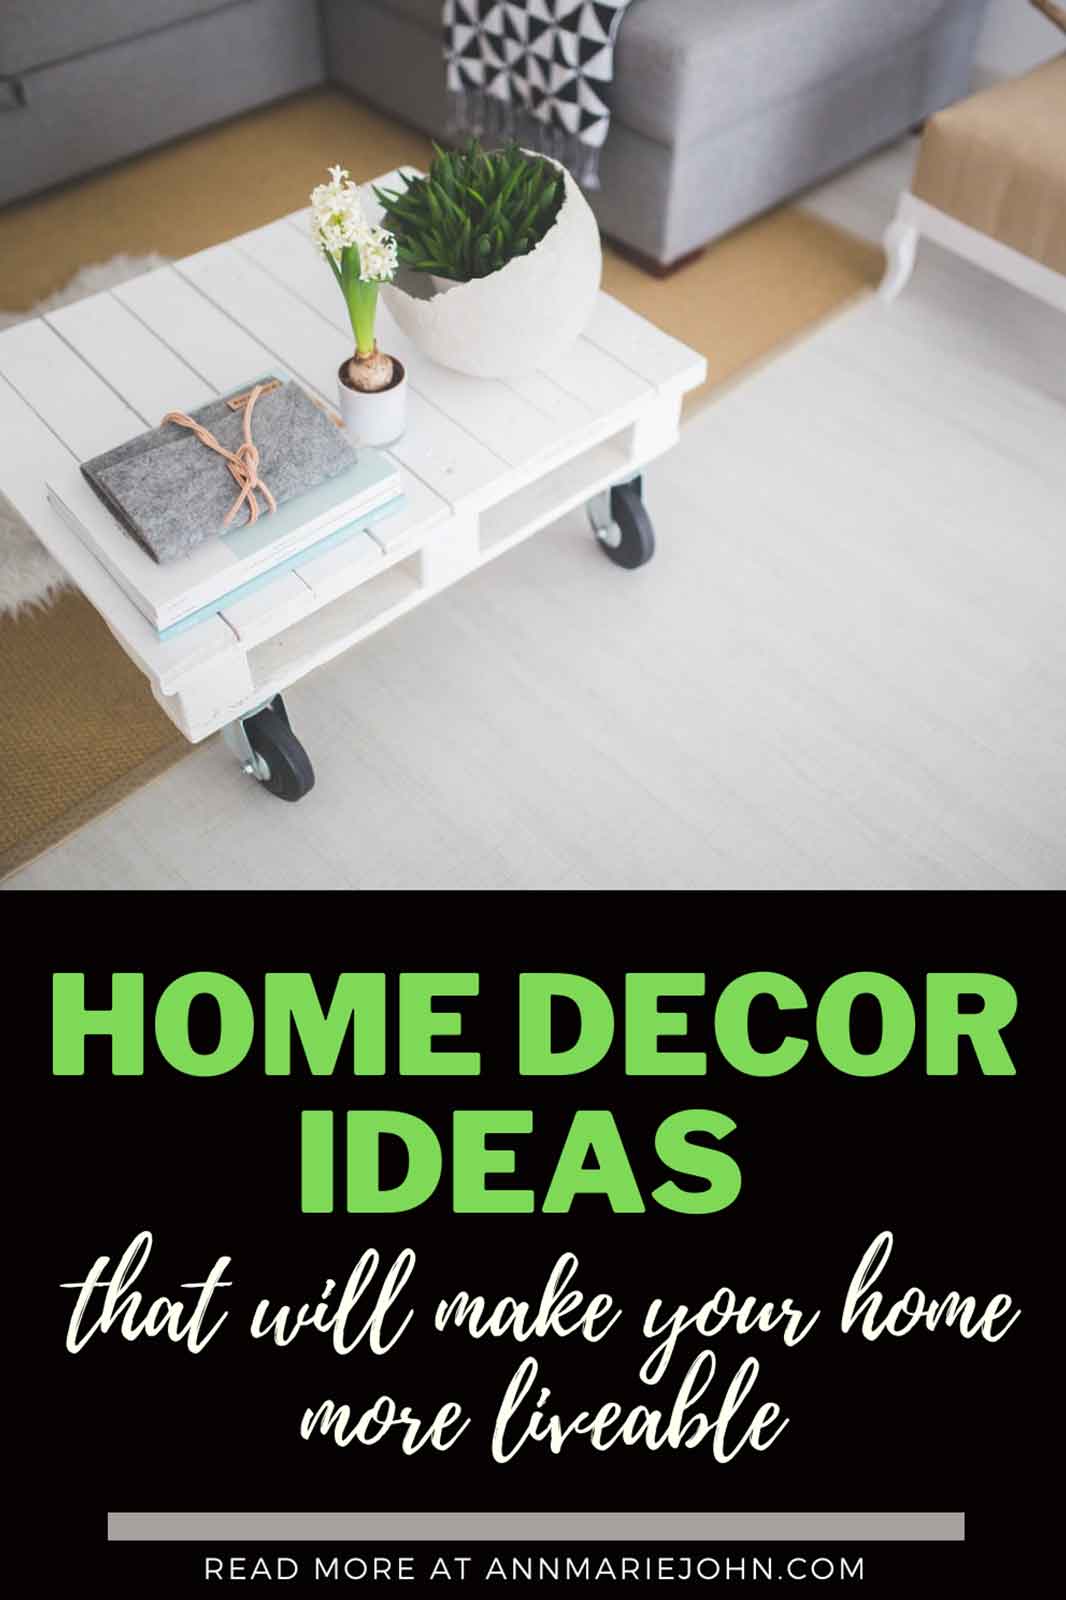 Home Decor Ideas That Will Make Your House More Livable